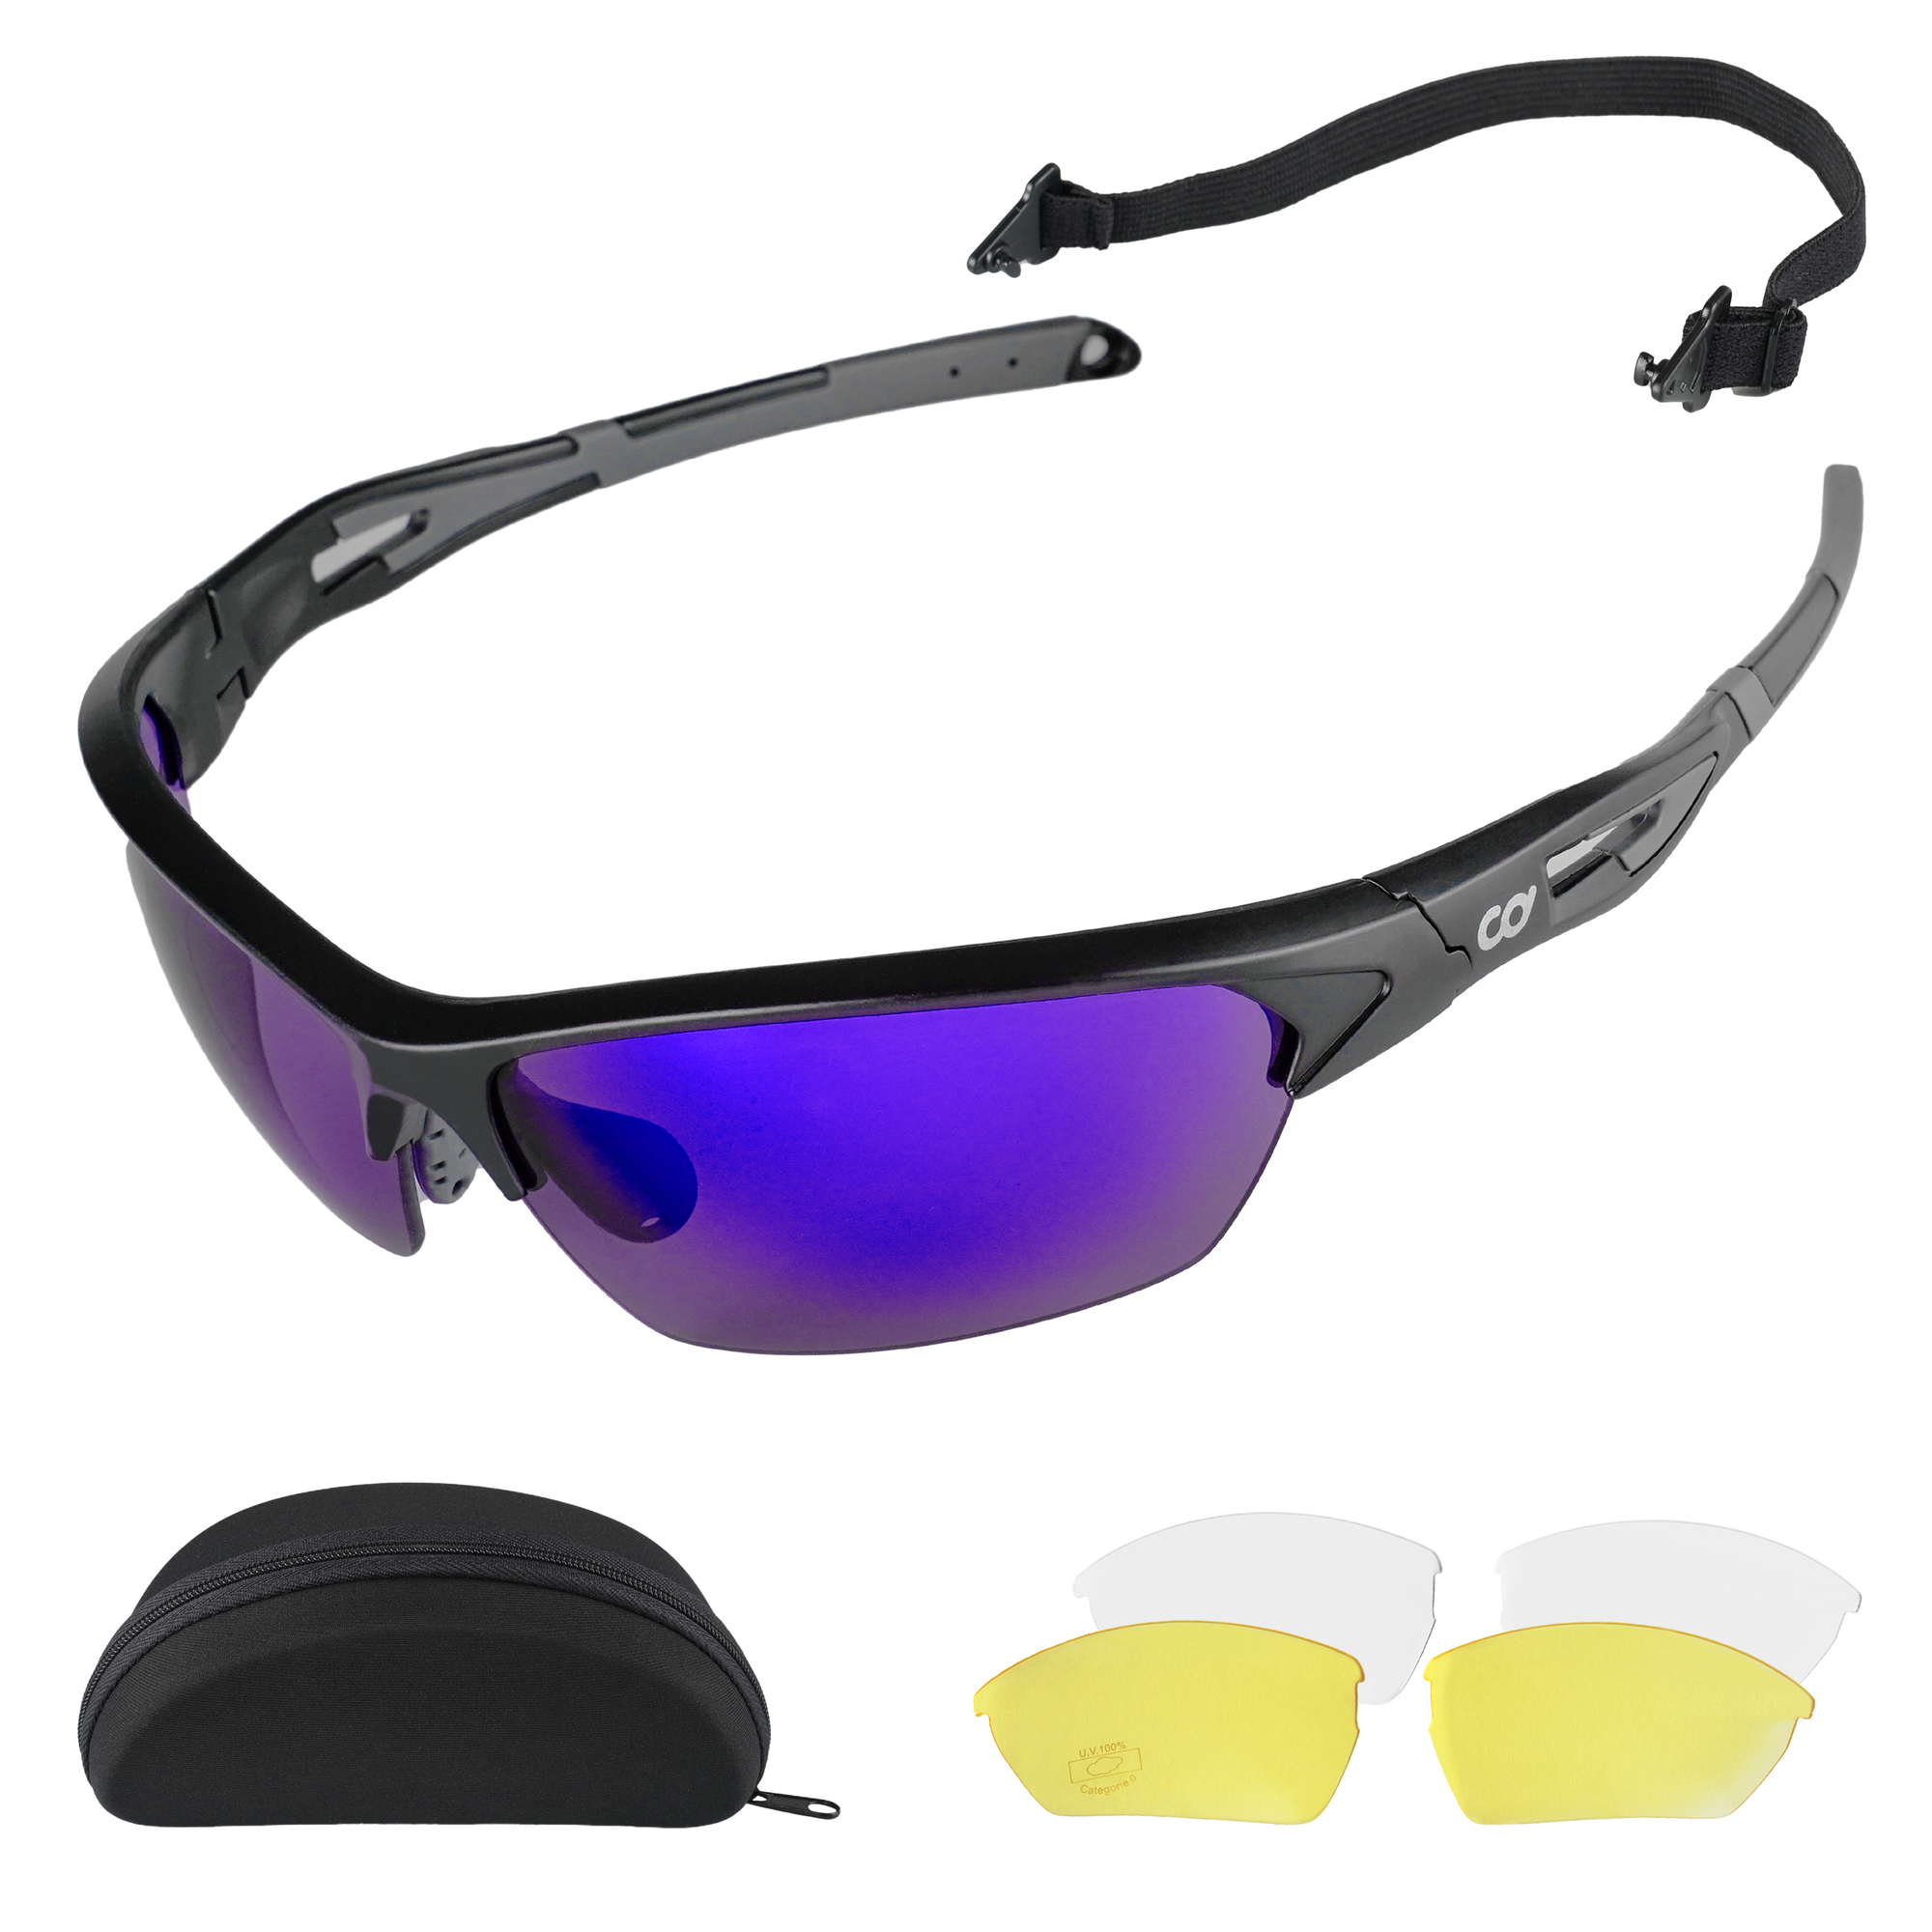 with Anti-Slip Elastic Strap CyclingDeal Professional Wrap-Around Bike Cycling Sunglasses with 3 Pairs of Interchangeable Lenses Anti-Scratch Design 100% UV400 Protection Super Light & Durable 